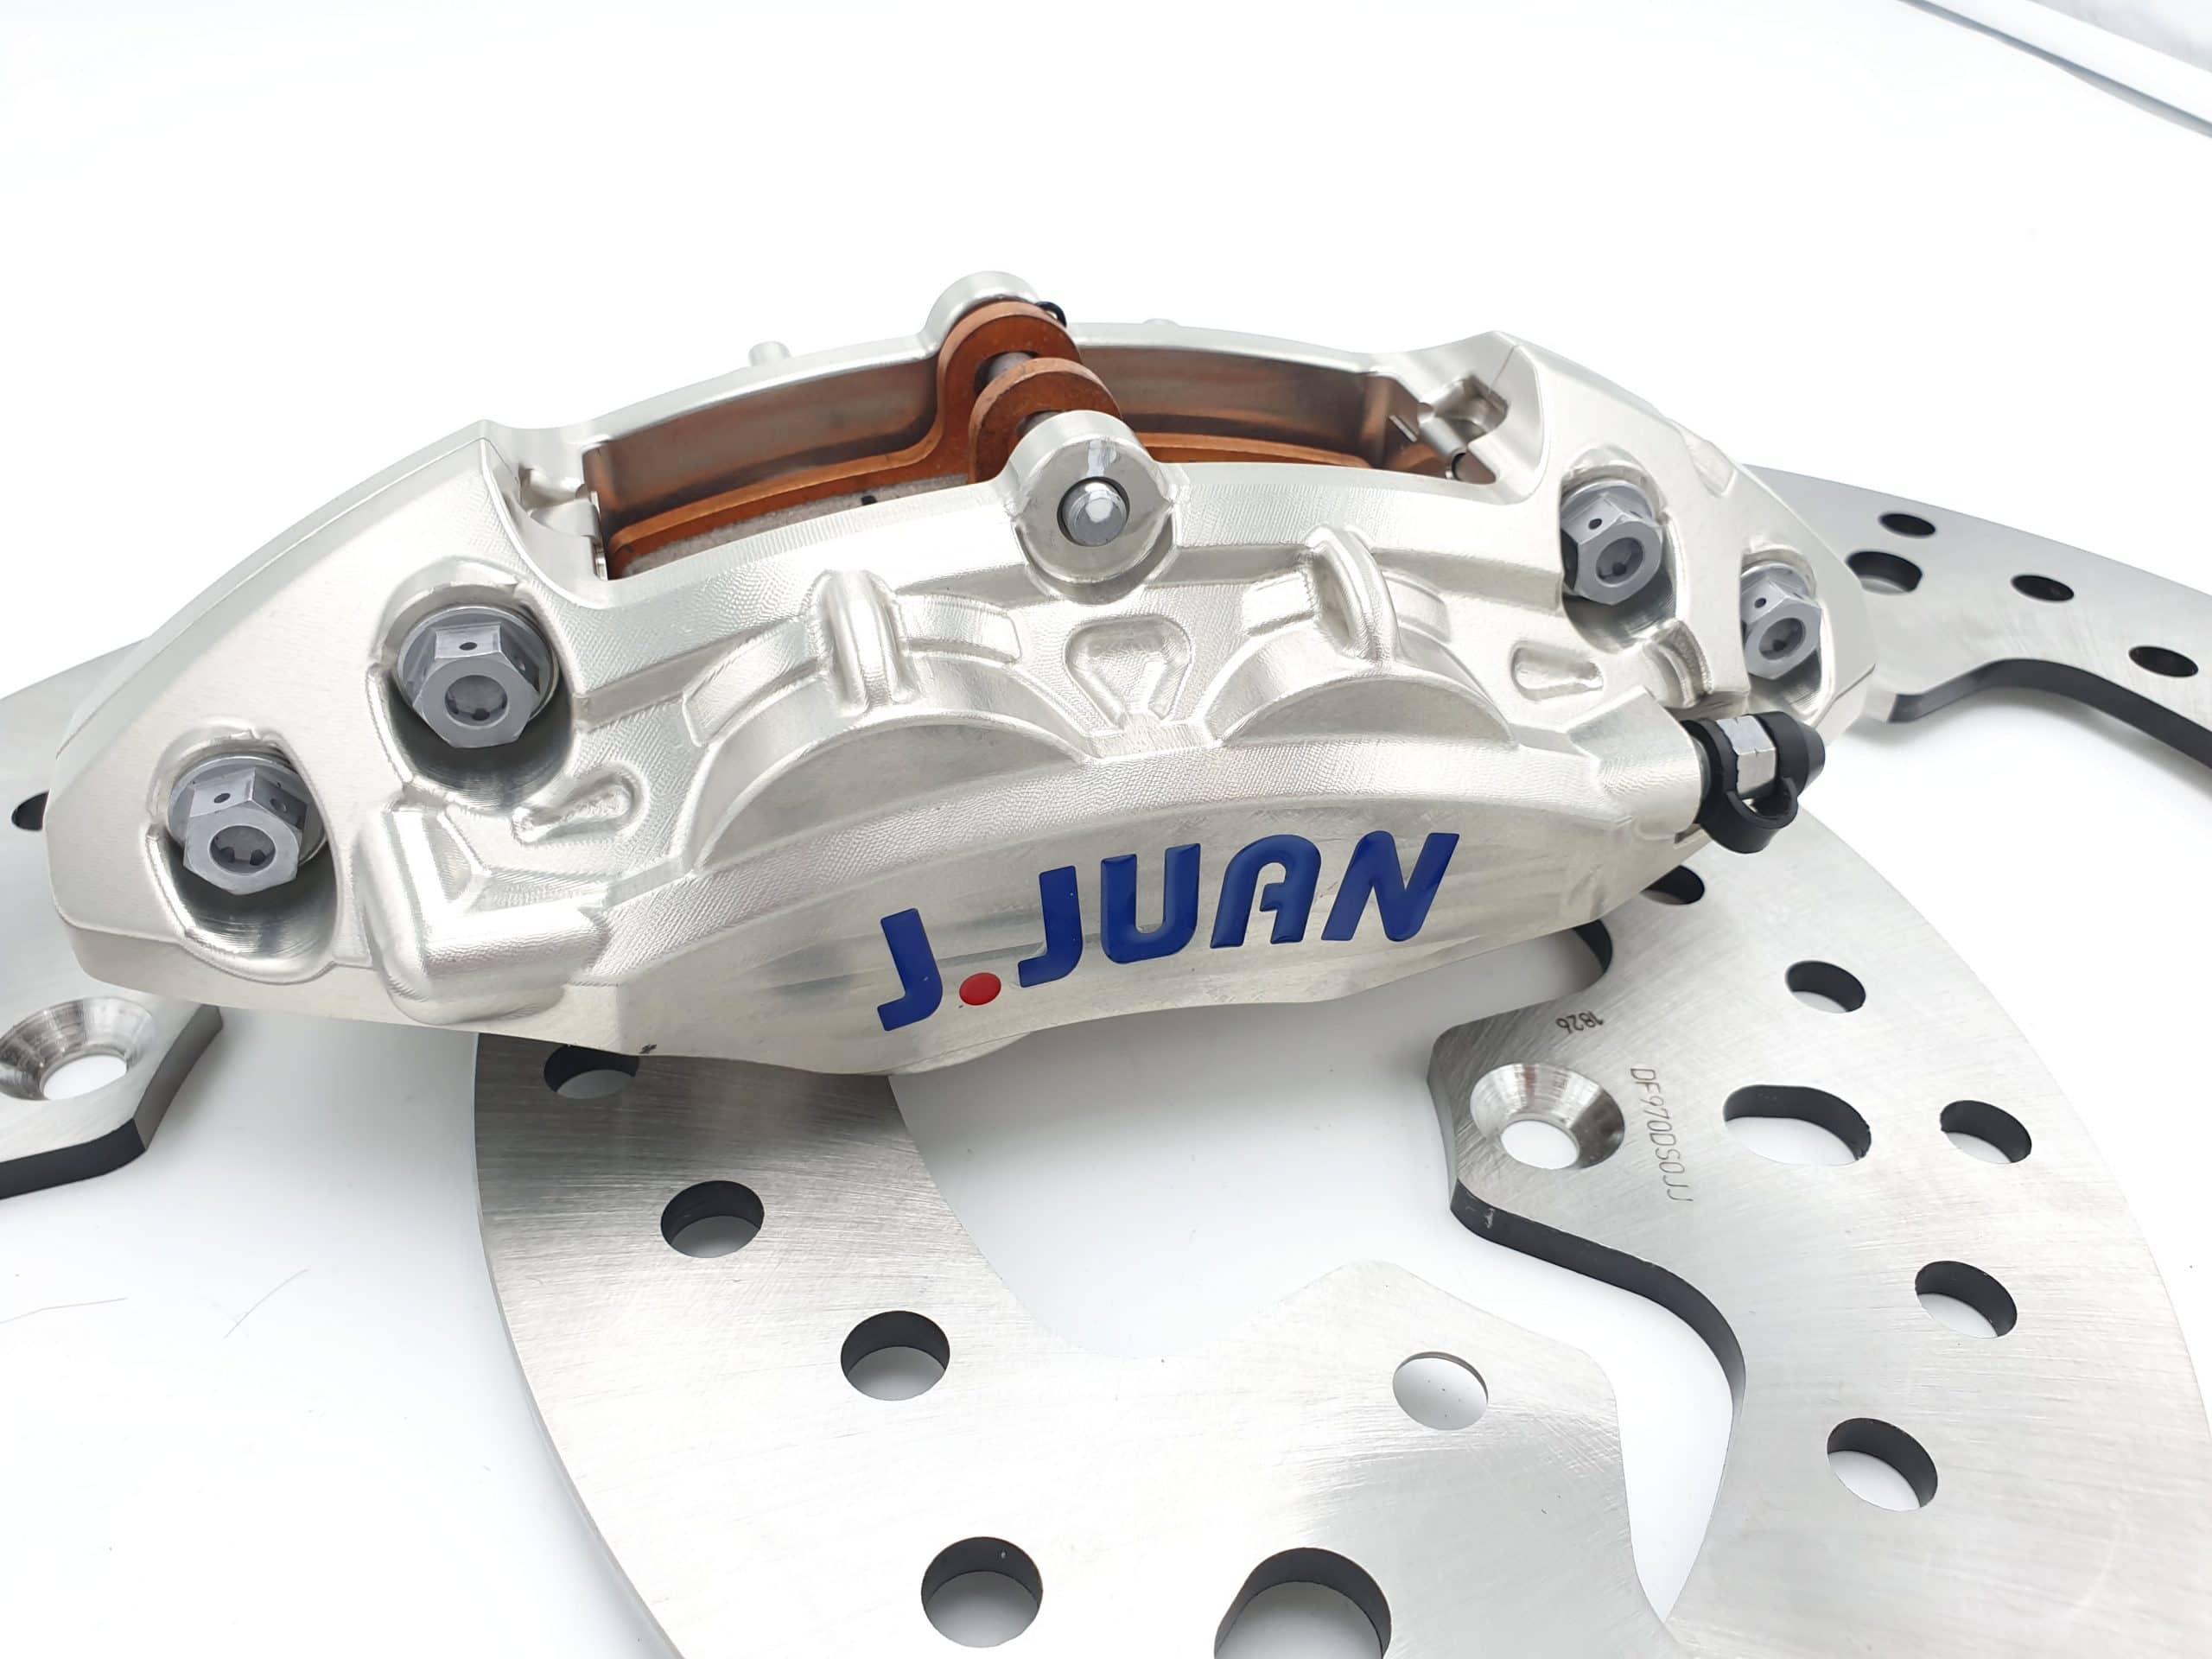 Brembo announced the completion of its acquisition of J.JUan